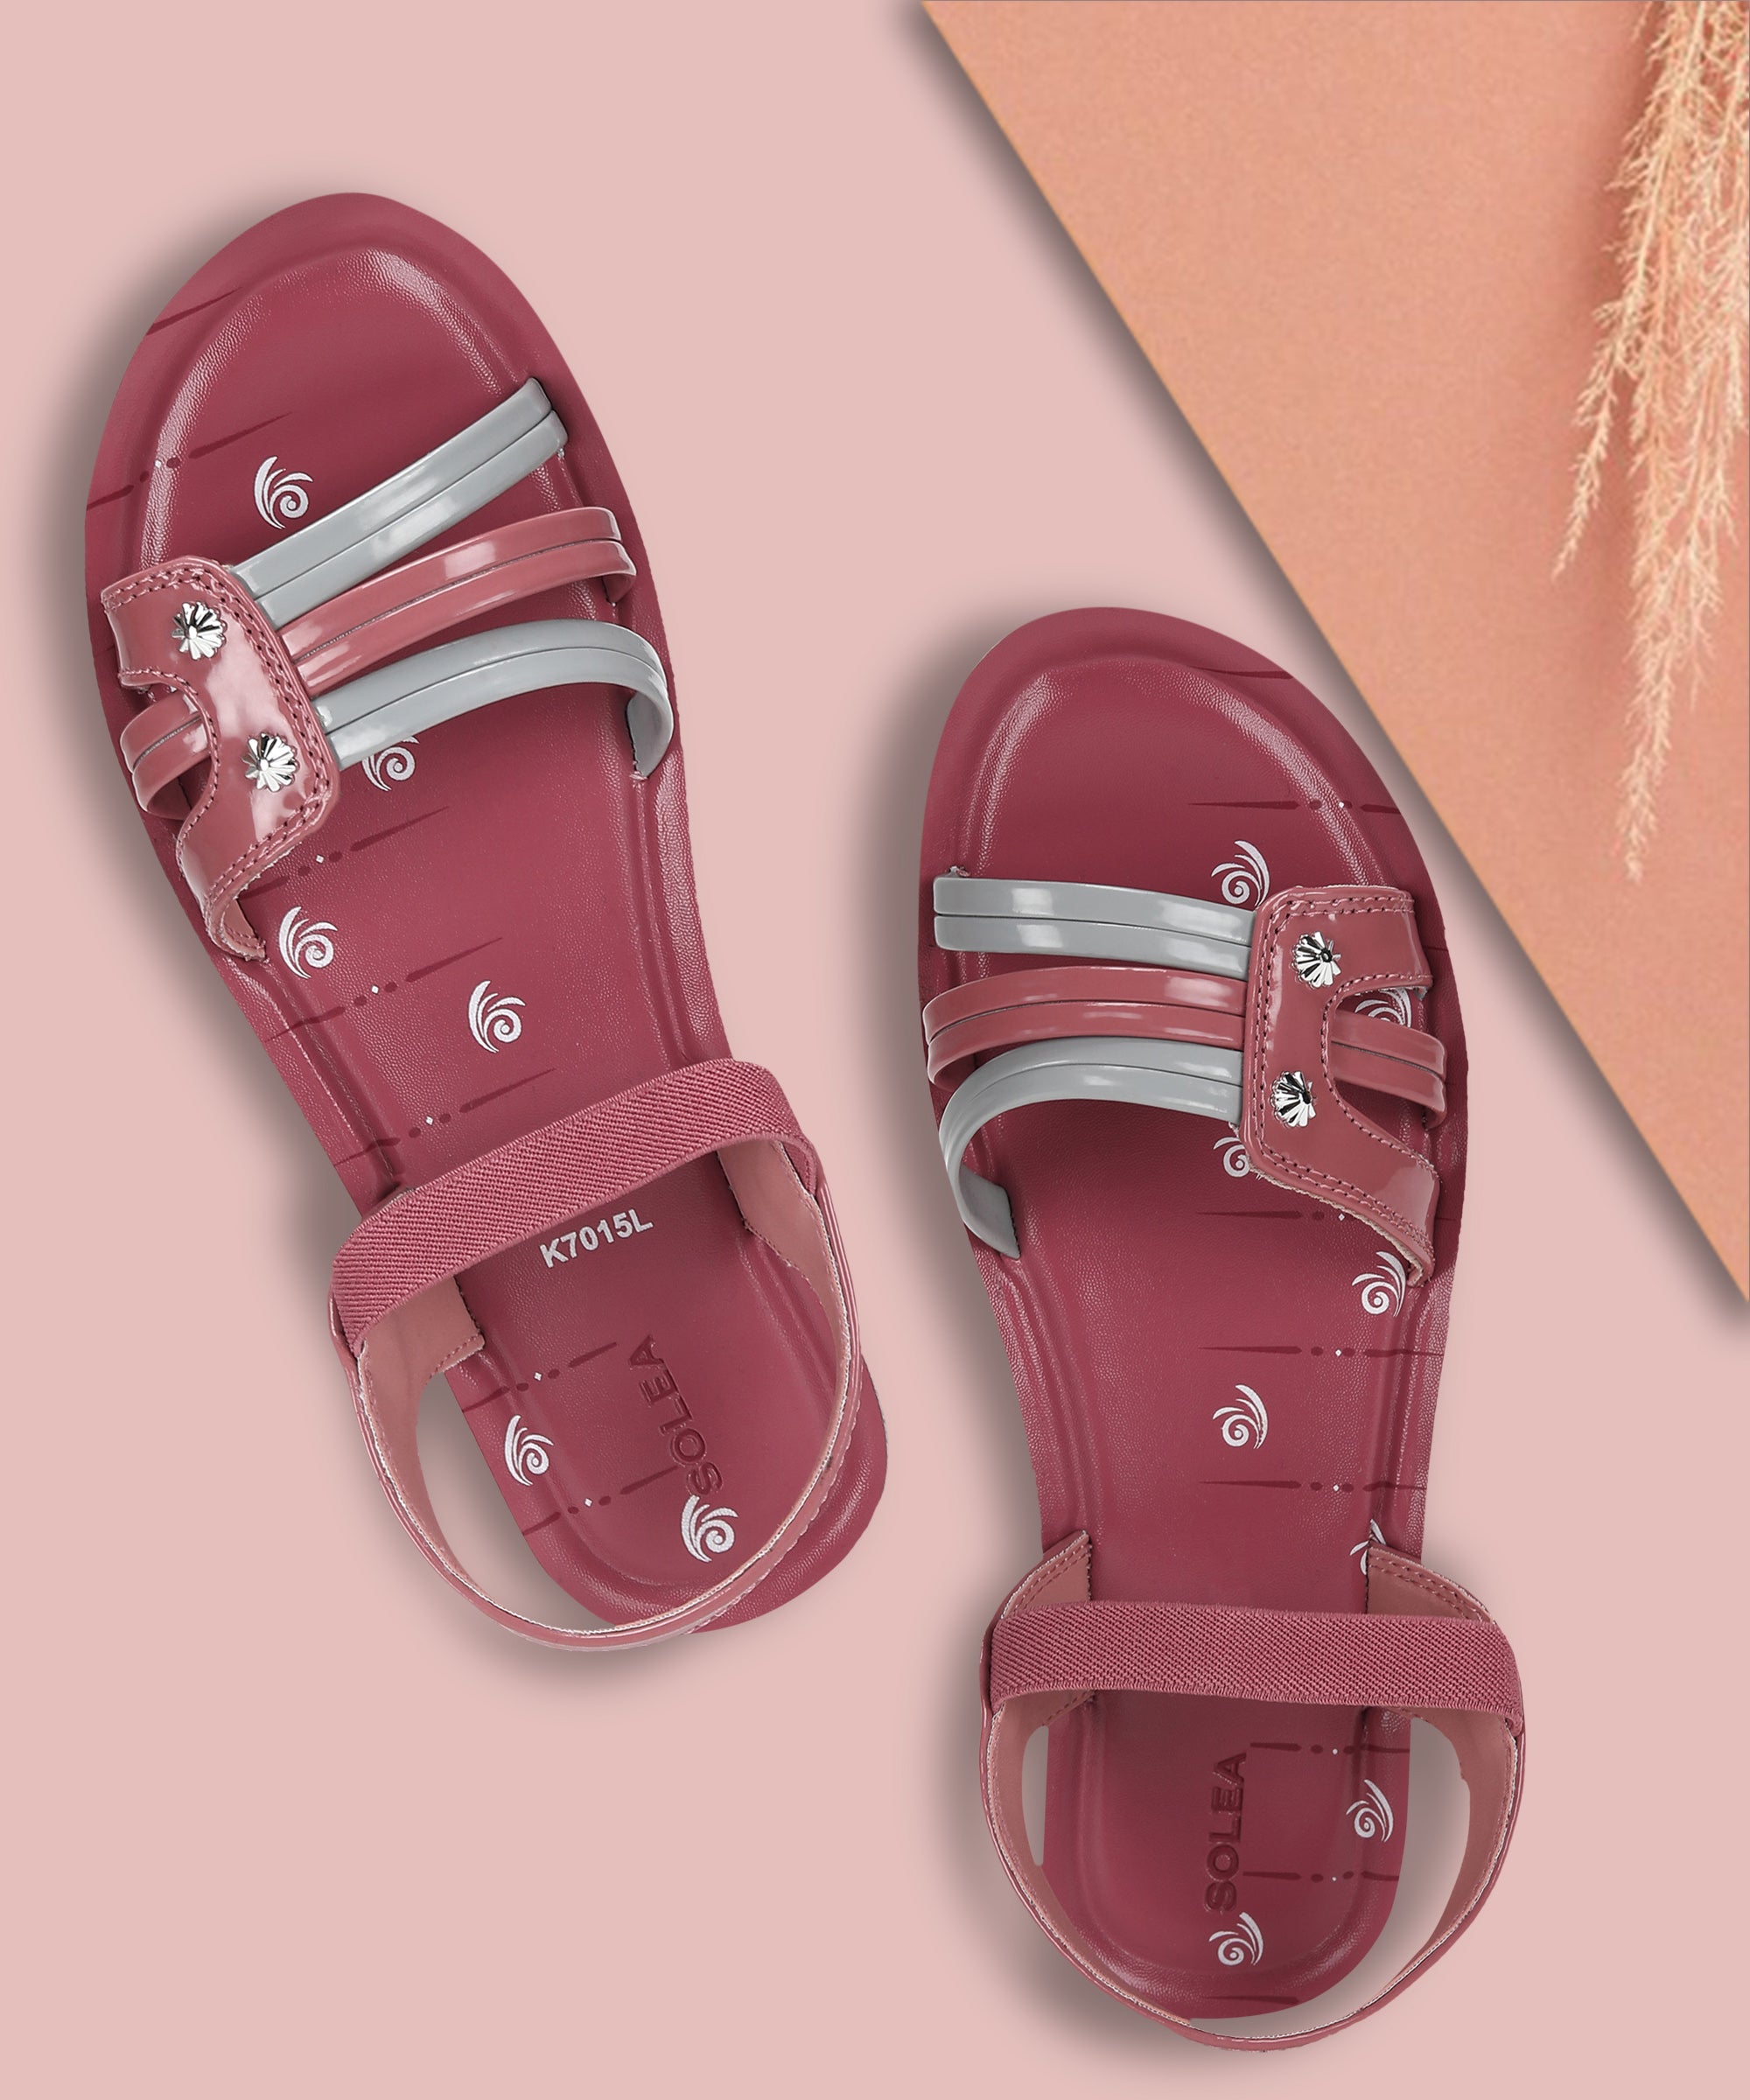 Paragon K7015L Women Sandals | Casual &amp; Formal Sandals | Stylish, Comfortable &amp; Durable | For Daily &amp; Occasion Wear